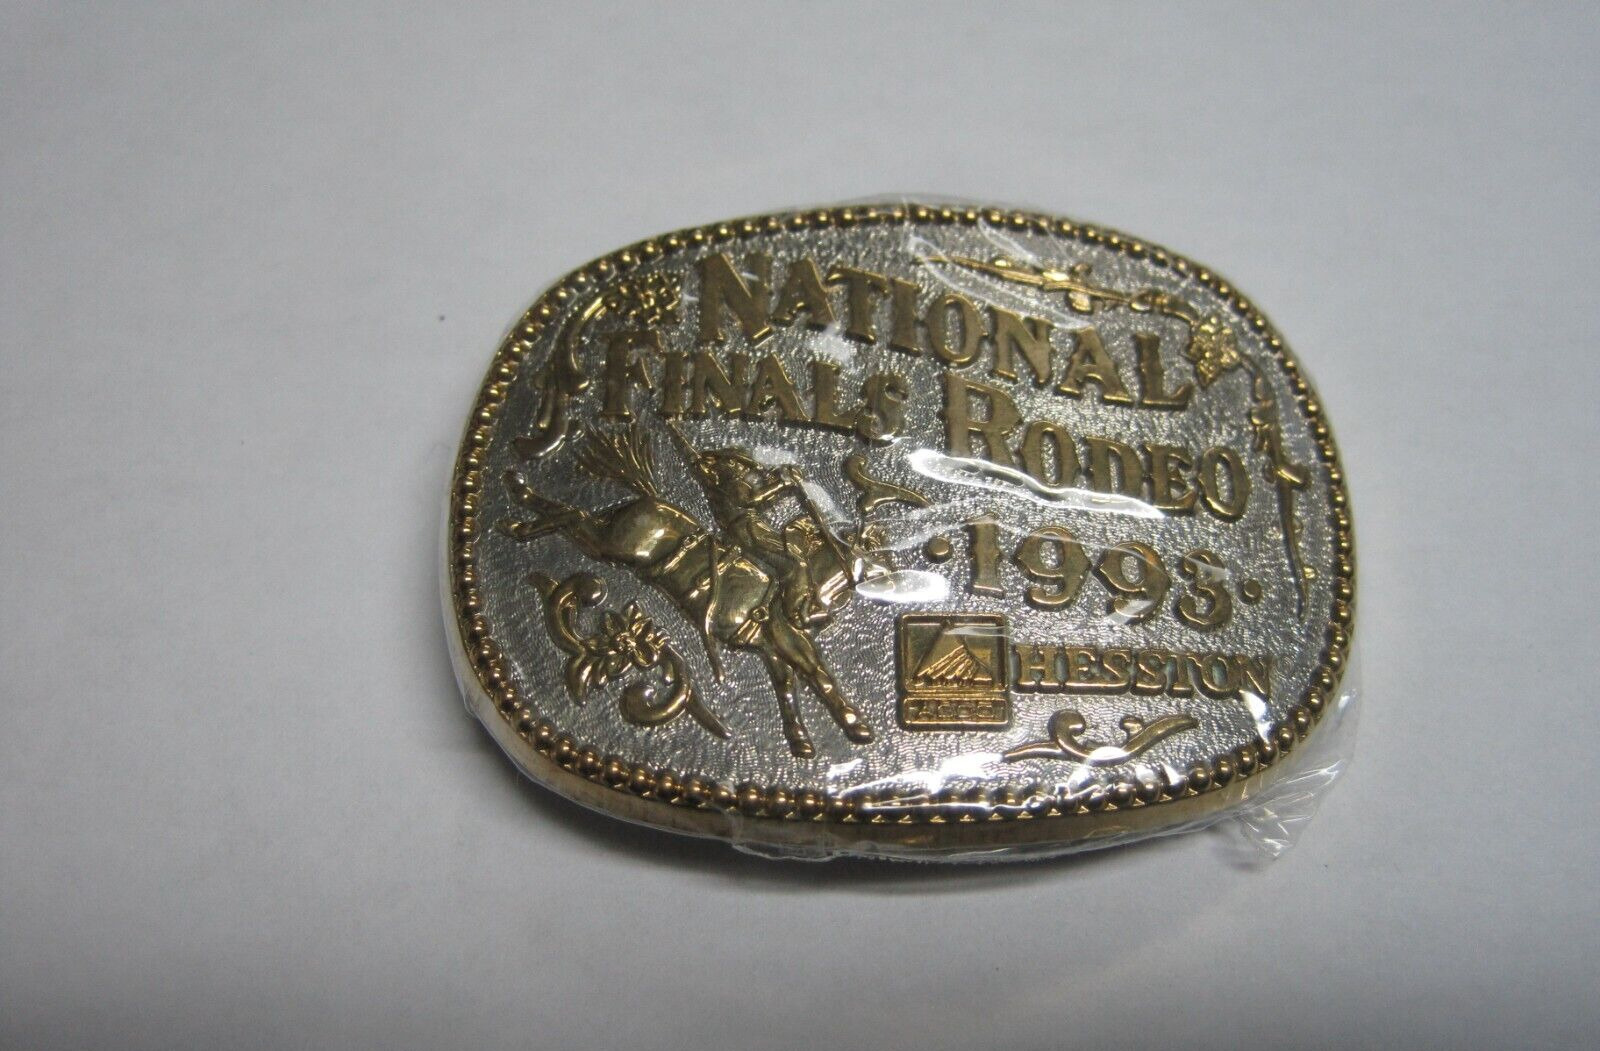 Hesston Gold & Silver 1993 Youth (Small) NFR Cowboy Rodeo Buckle, New in Shrink